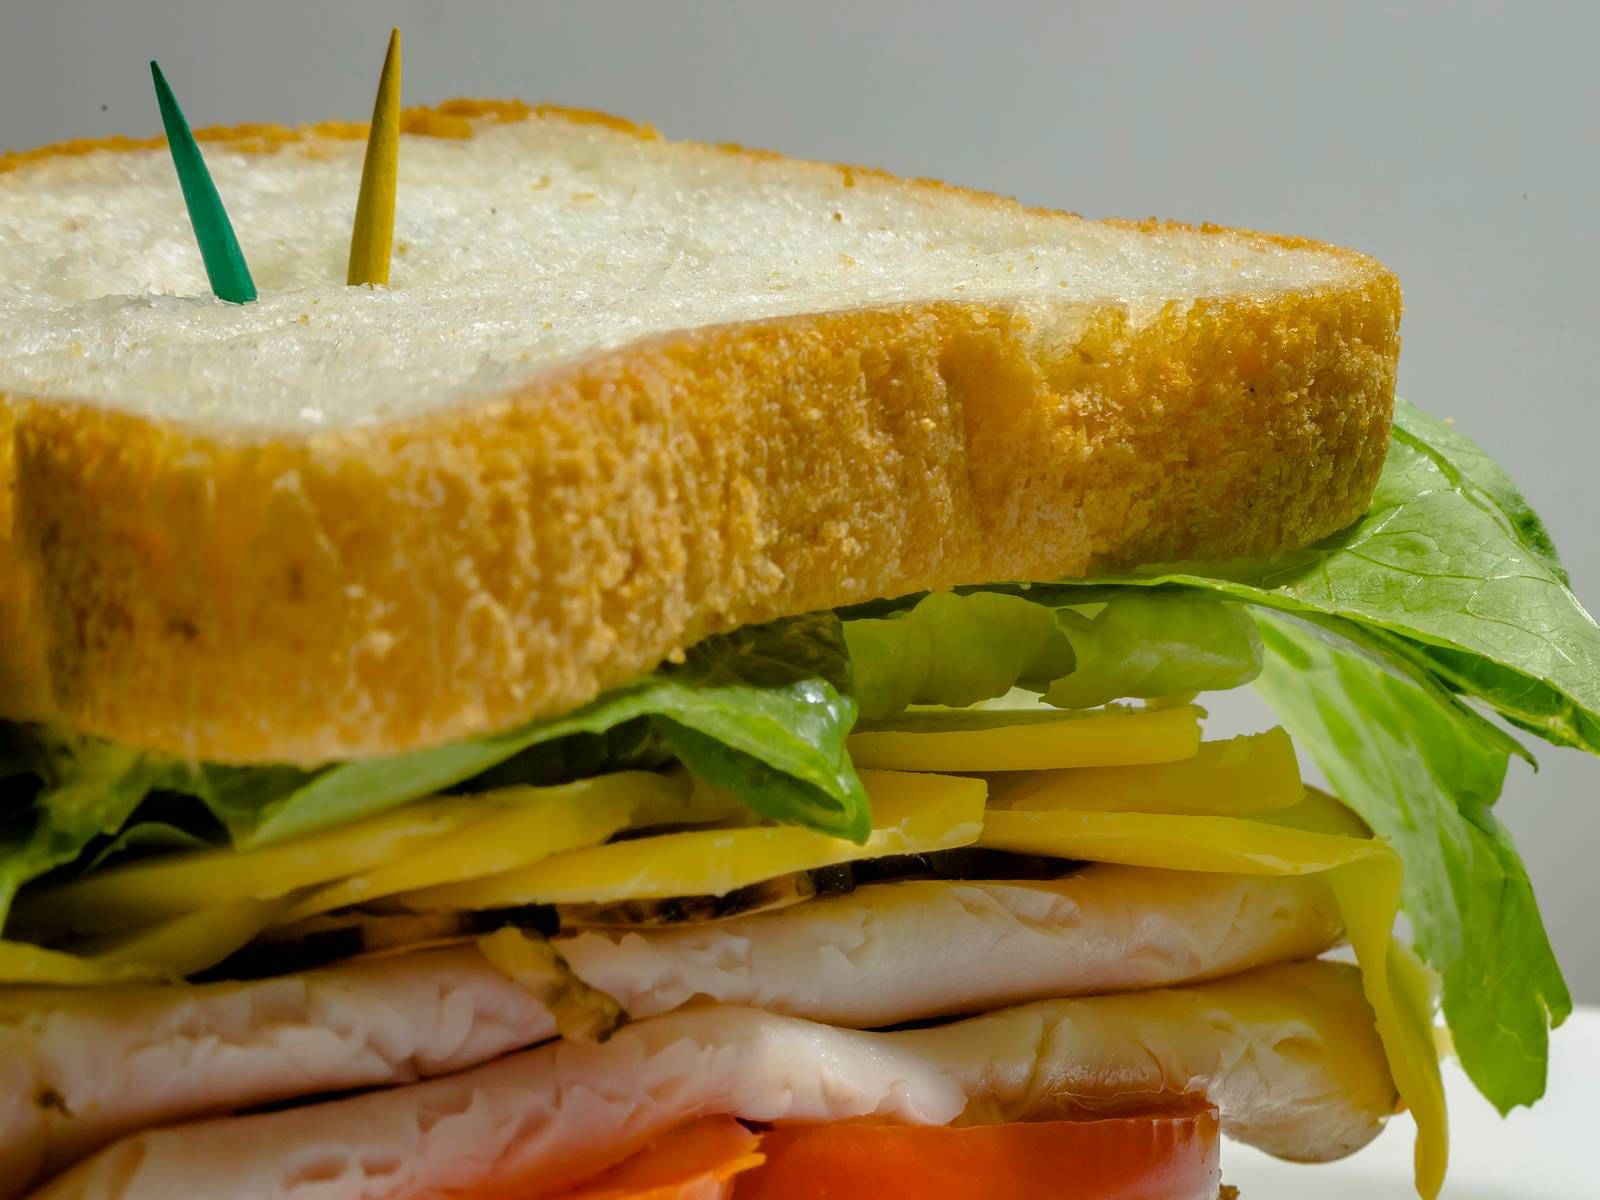 Case study: Athlete swallows toothpick hiding in sandwich